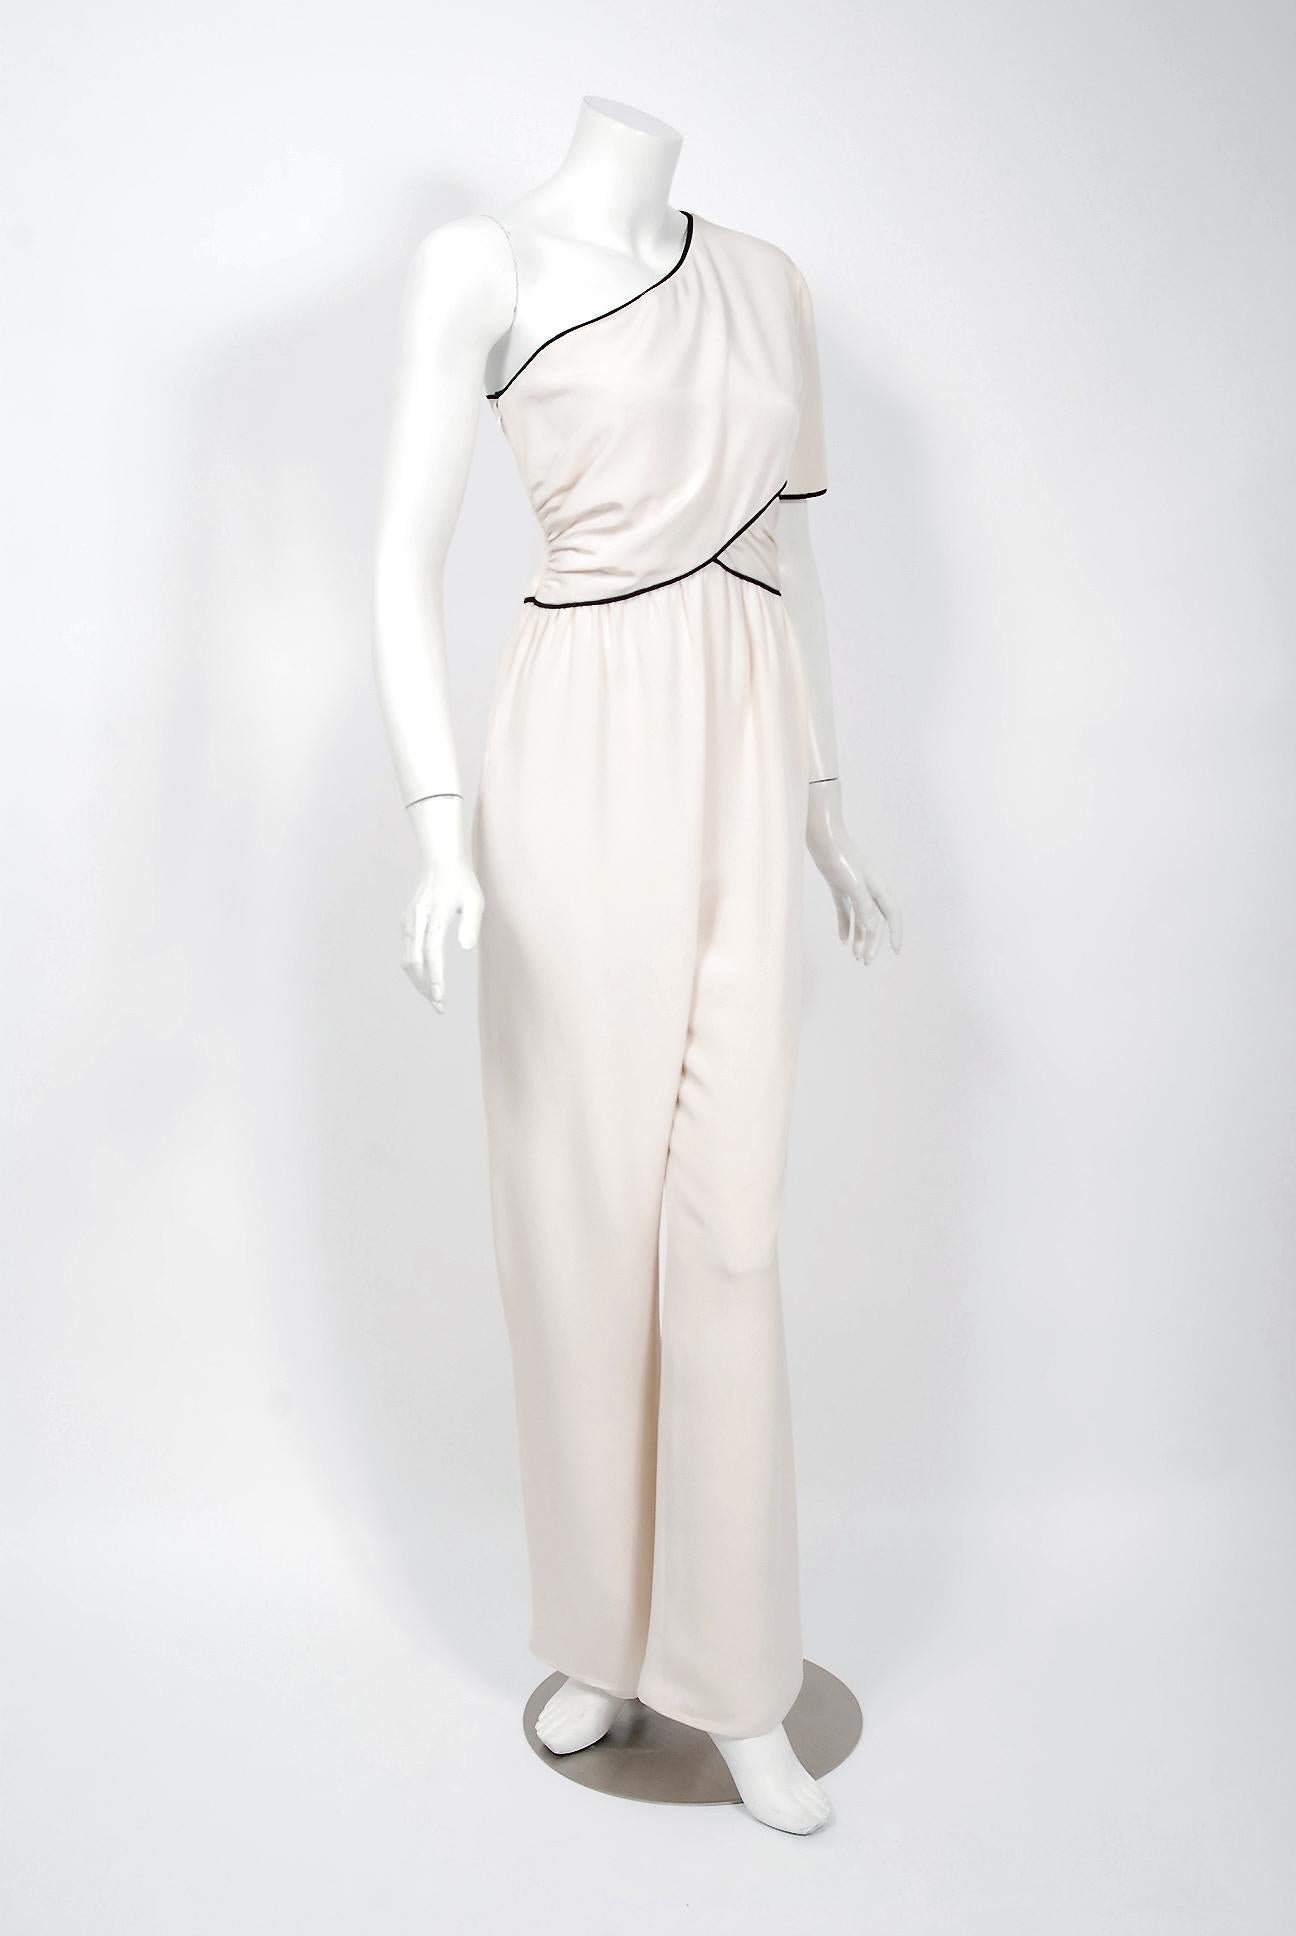 Gorgeous Bill Blass Couture ivory-creme silk jumpsuit dating back to his 1979 collection. Building upon the innovations of European designers such as Coco Chanel, Blass made clothes that allowed women a modern sense of ease. He made glamorous